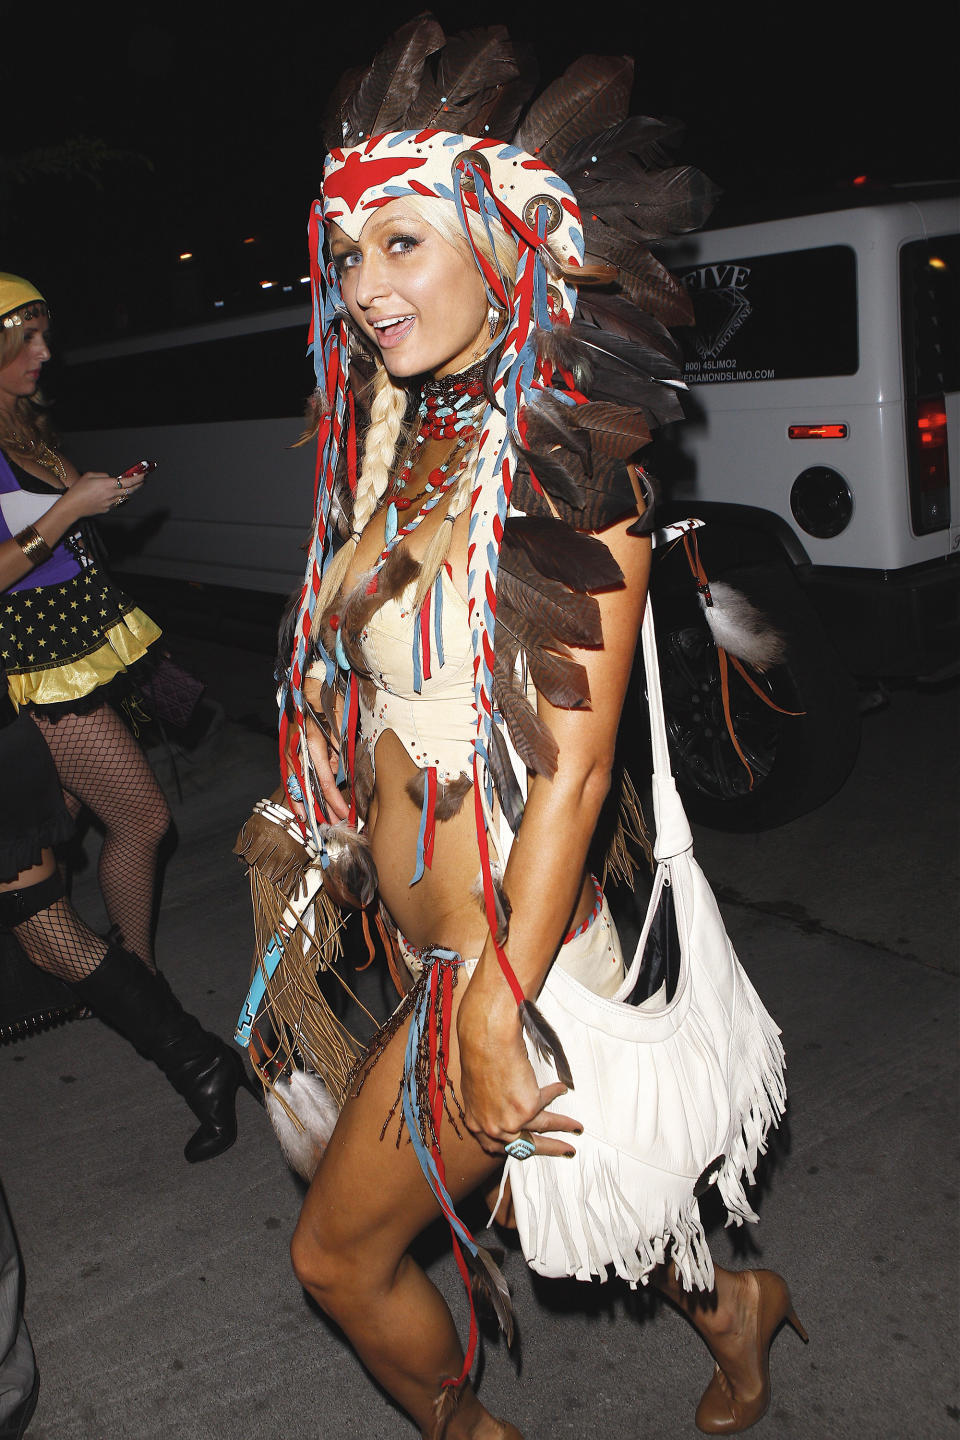 <p>Years before, in 2010, the socialite also offended as a sexy Native American. (Photo: X17) </p>